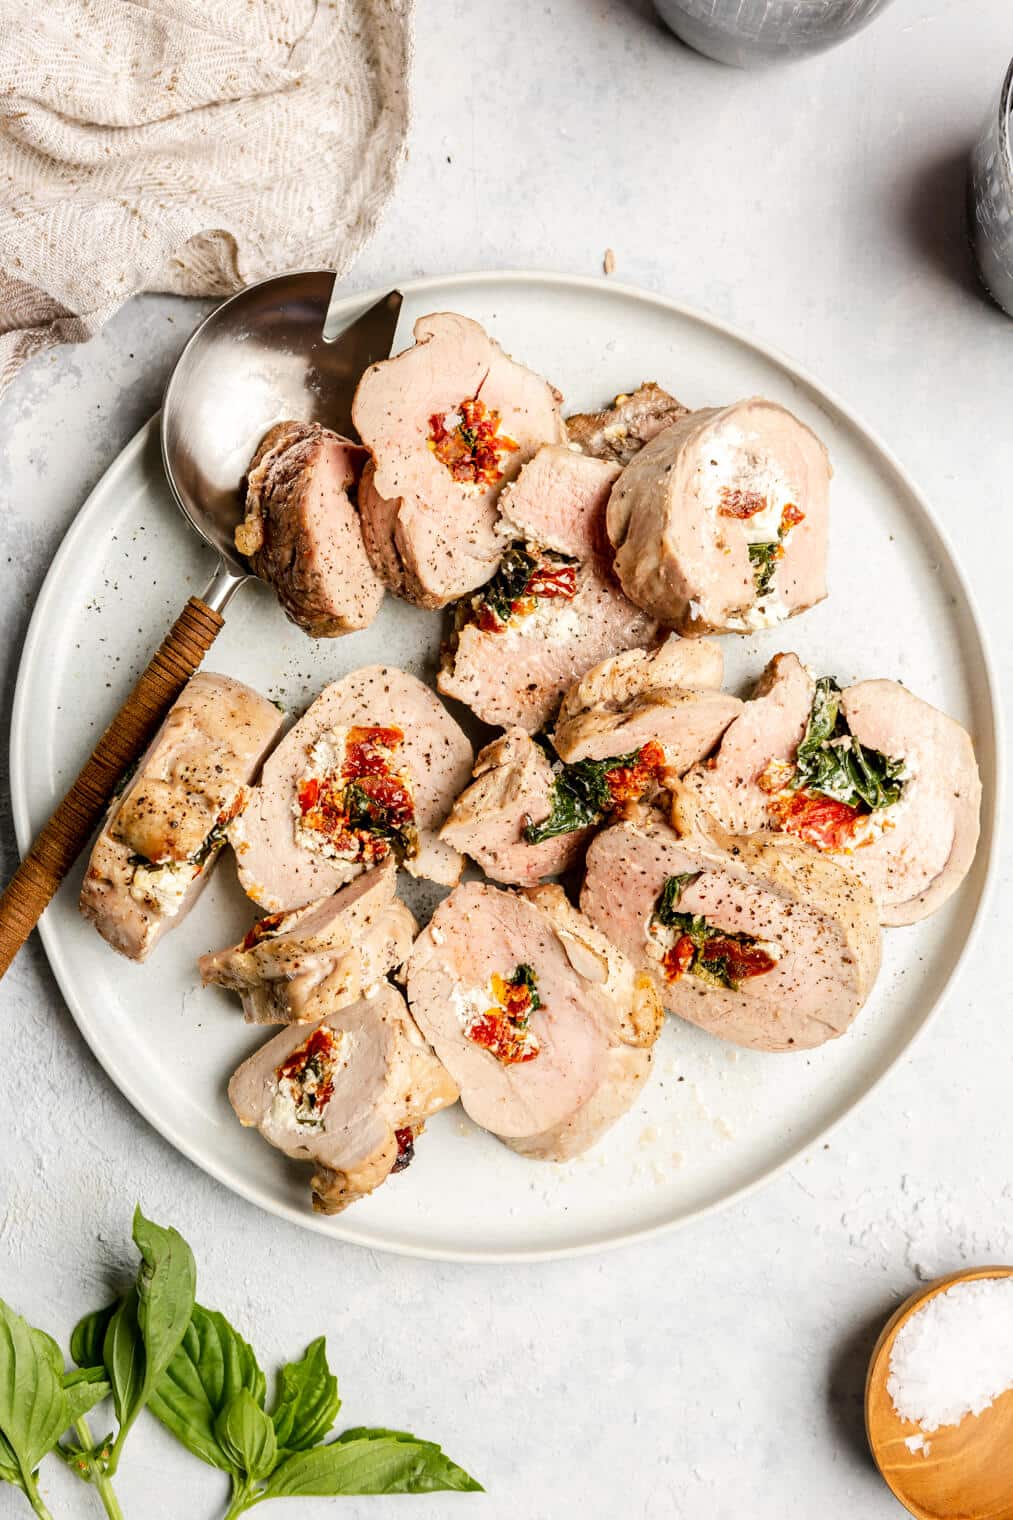 Stuffed pork tenderloin slices on a plate next to a serving spoon on a light grey/white surface.